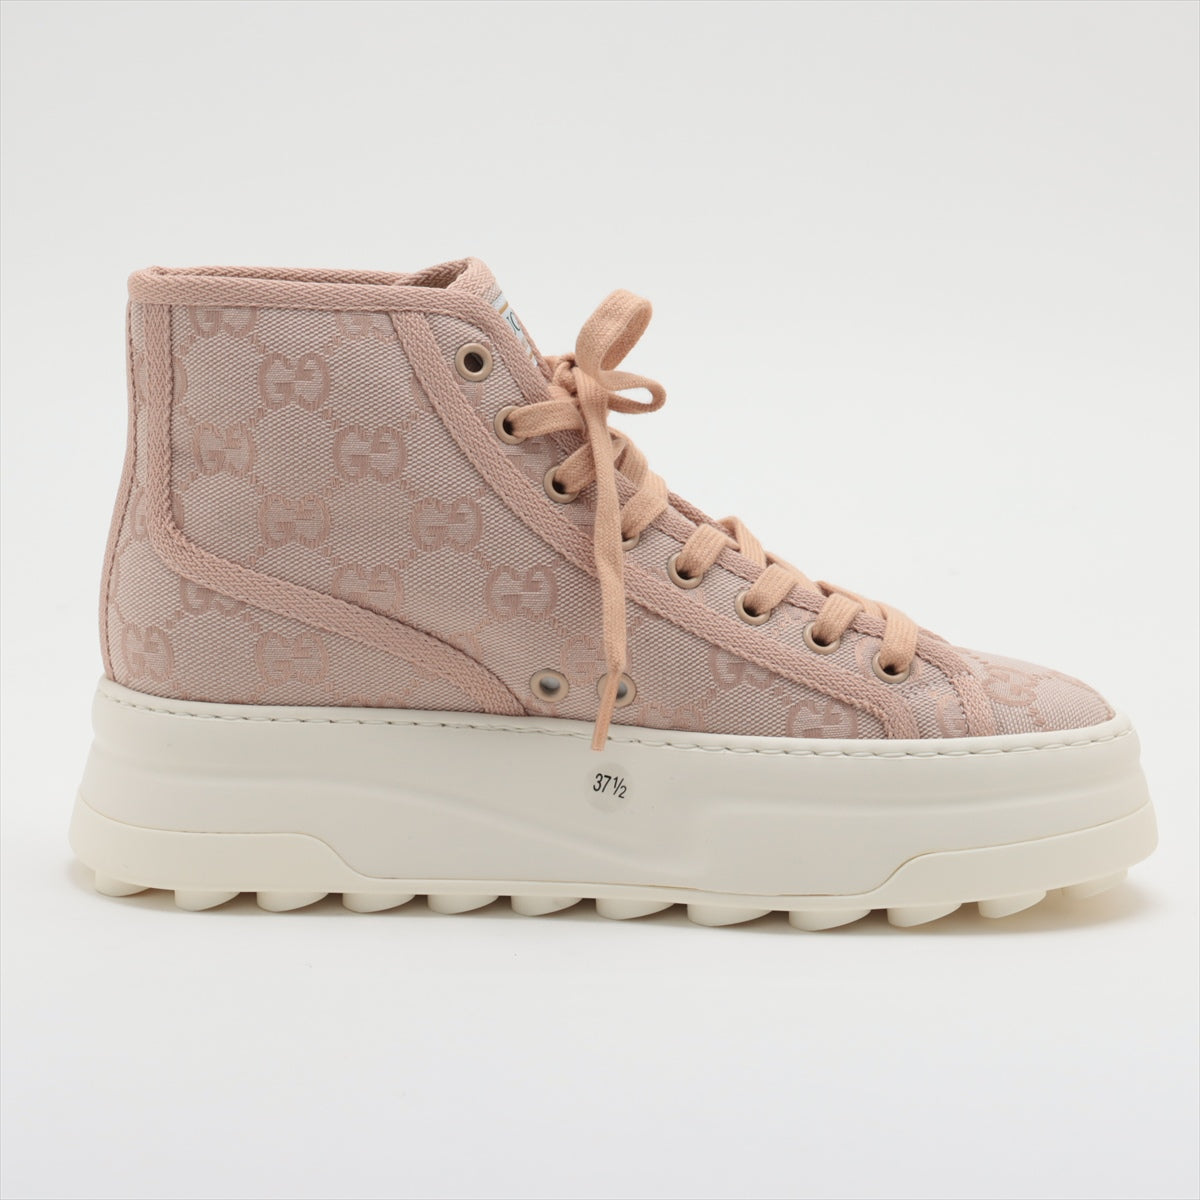 Gucci GG Supreme canvas High-top Sneakers 37.5 Ladies' Pink tennis 1977